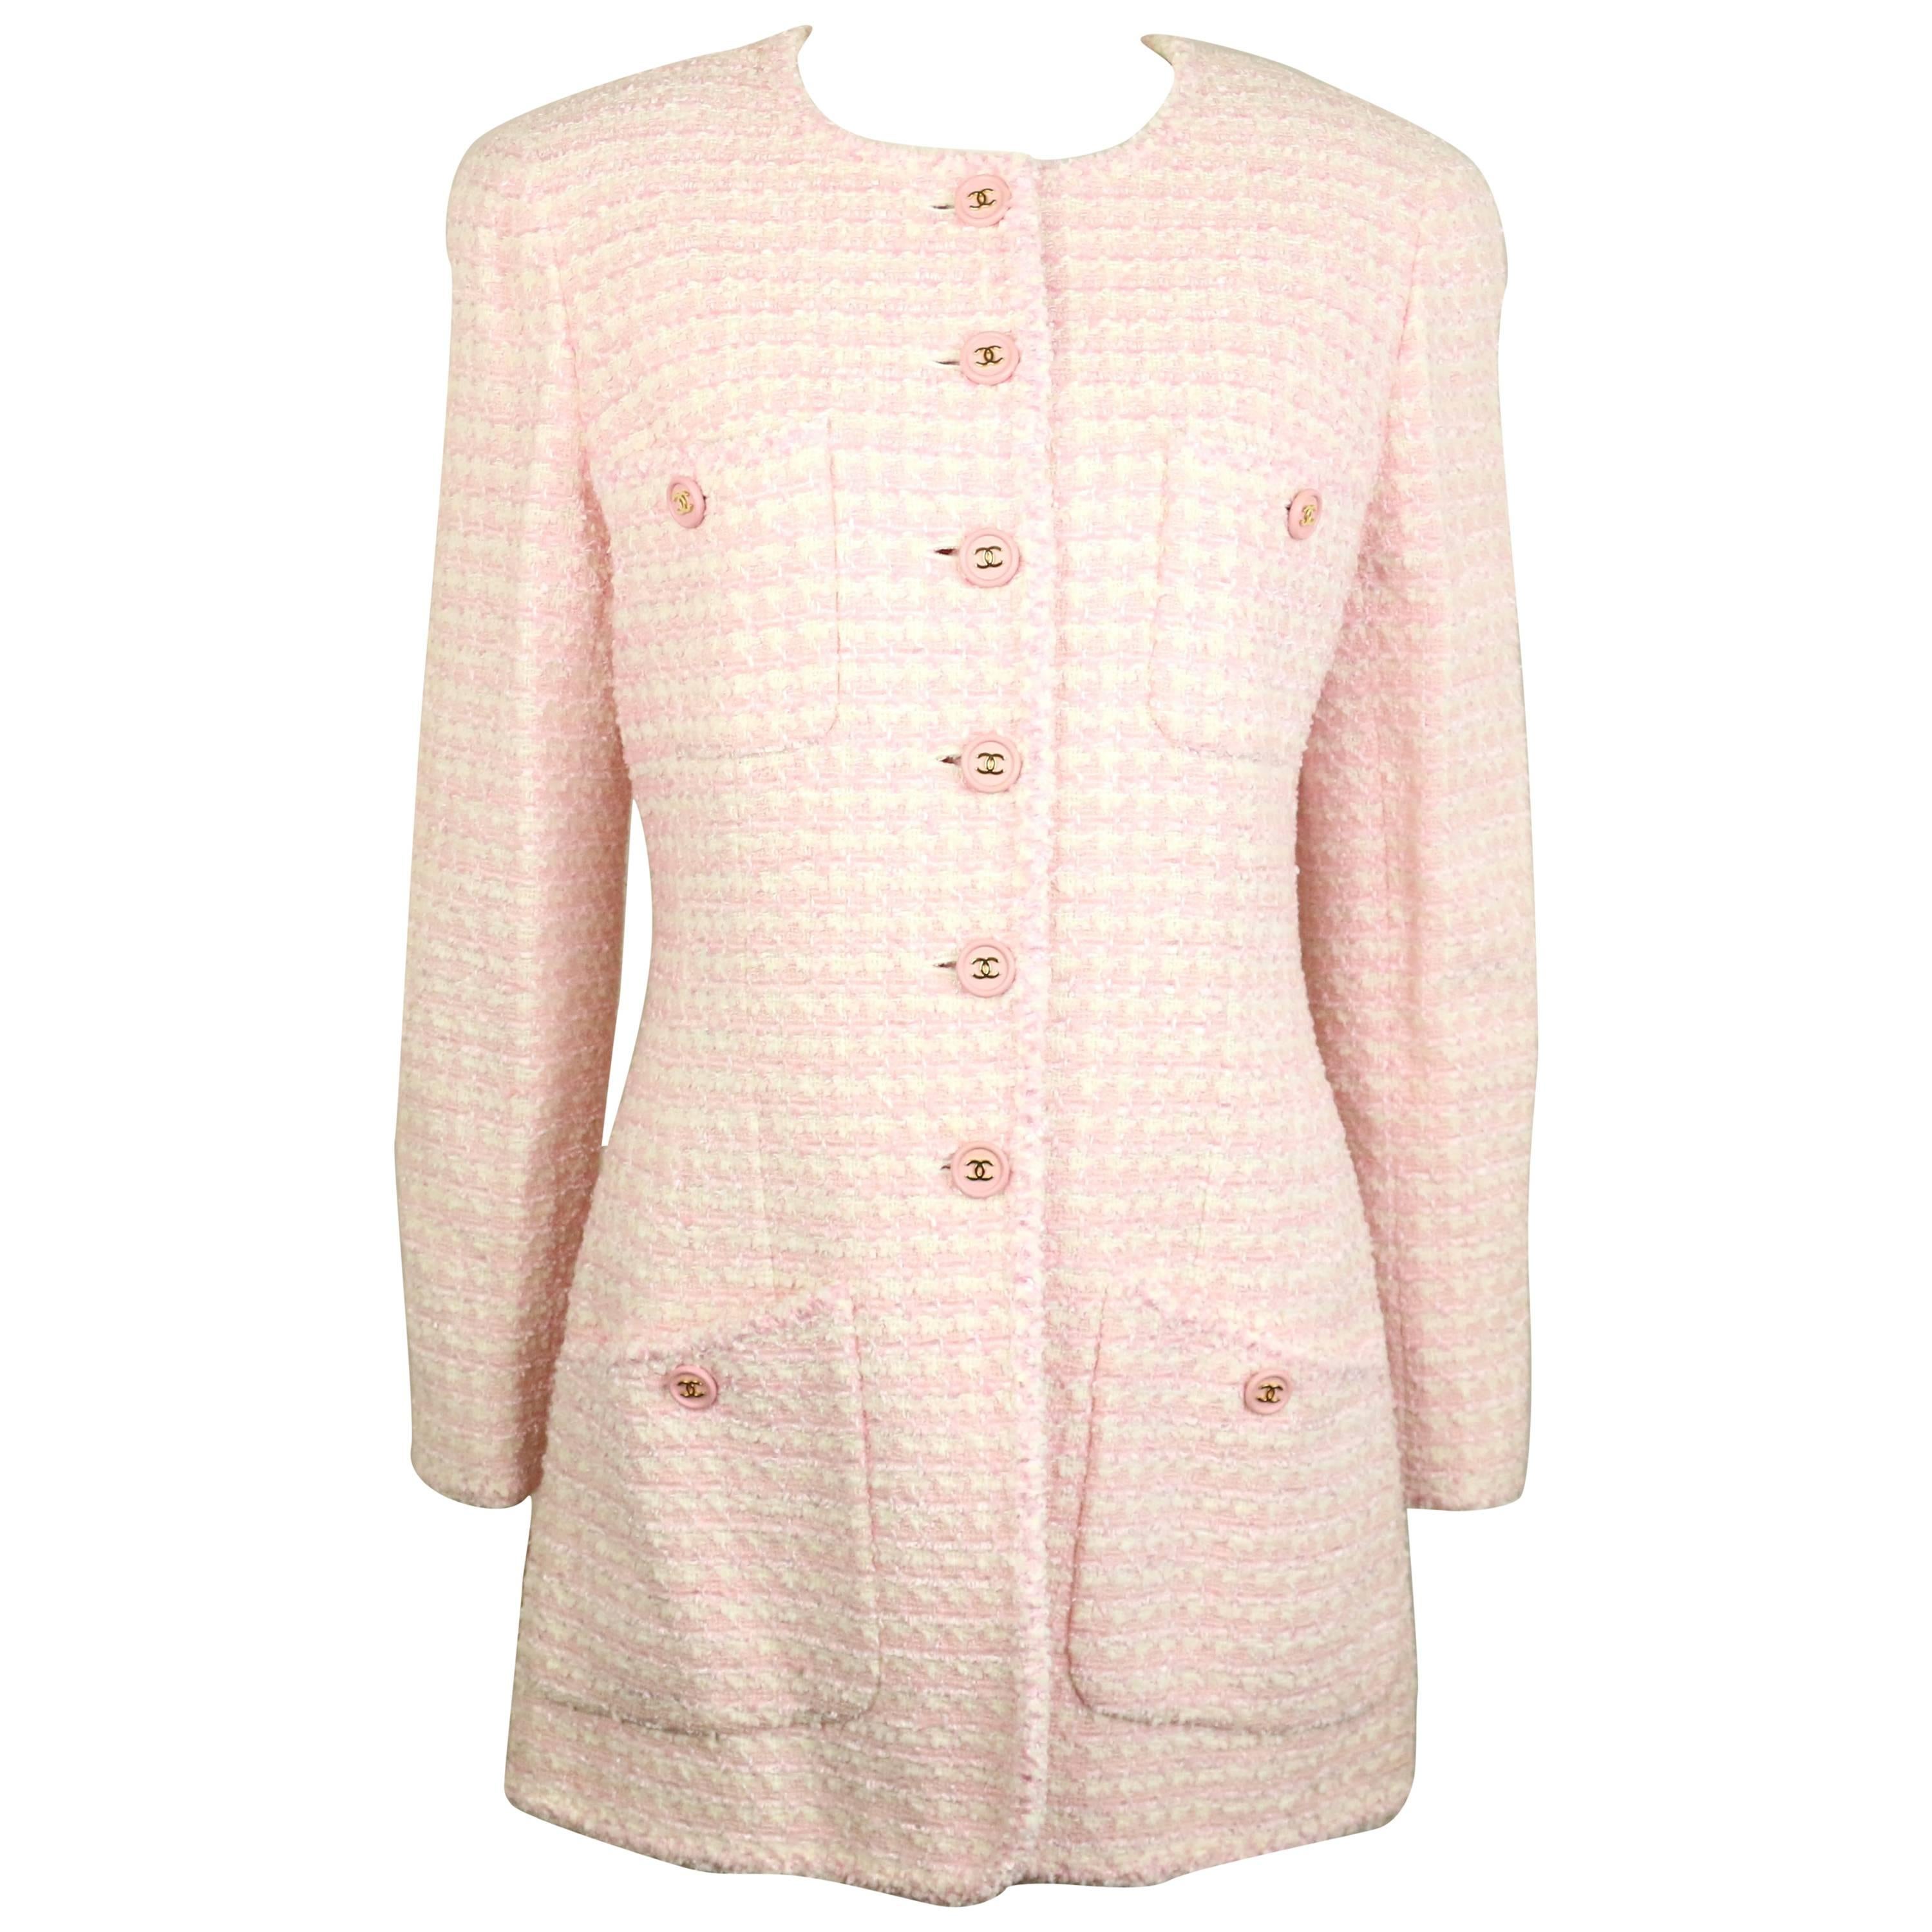 Chanel White and Pink Tweed Jacket